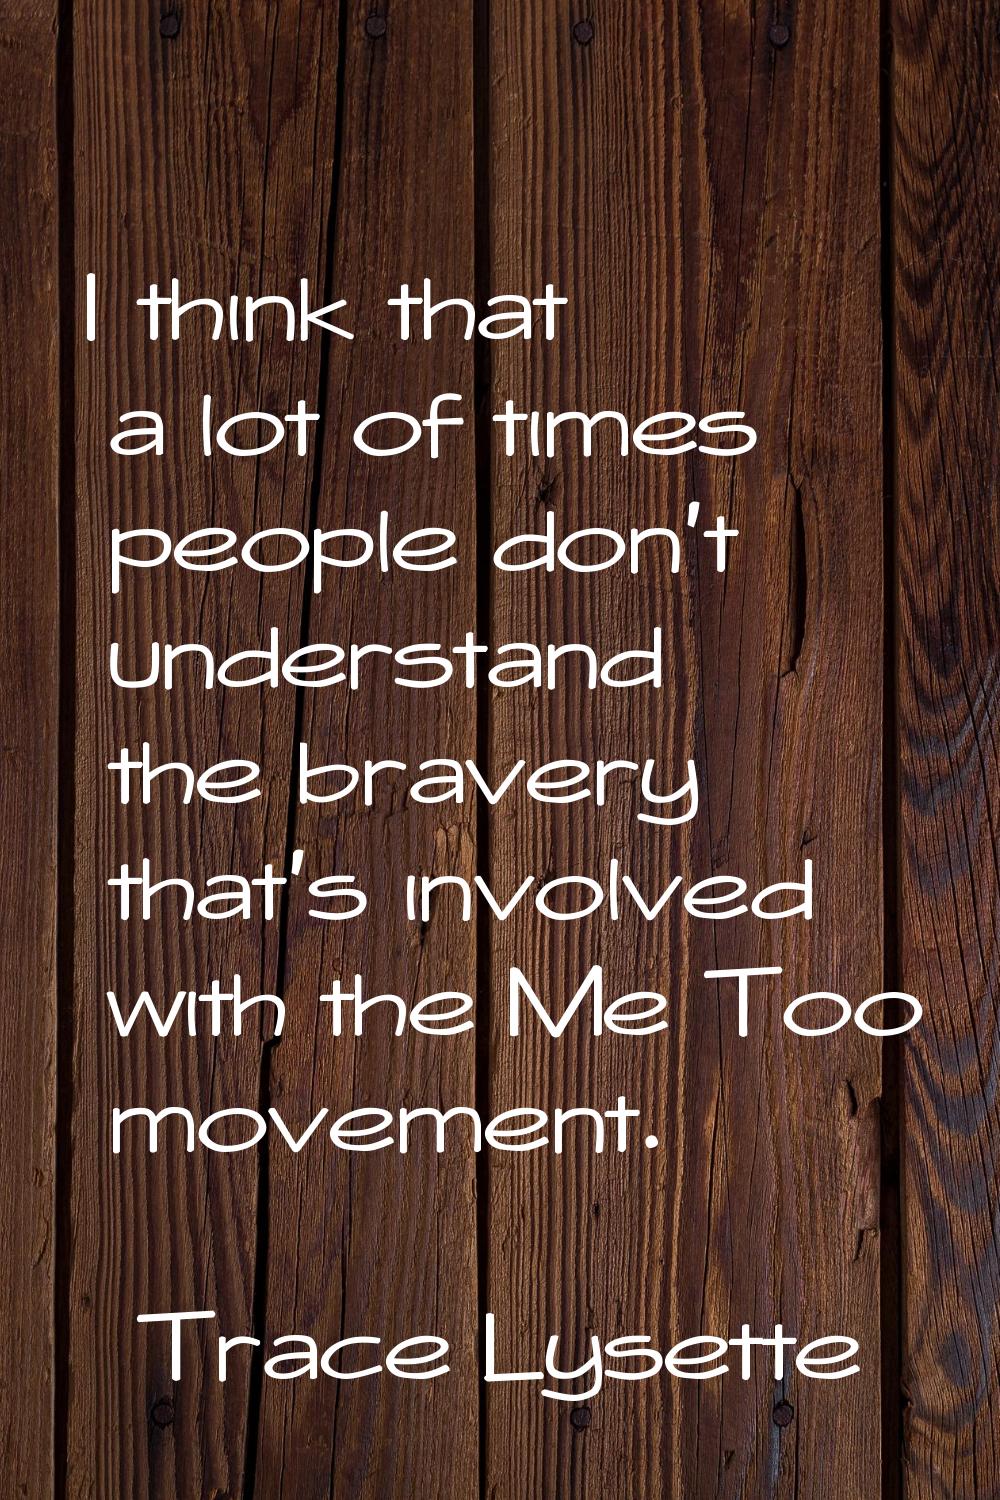 I think that a lot of times people don't understand the bravery that's involved with the Me Too mov